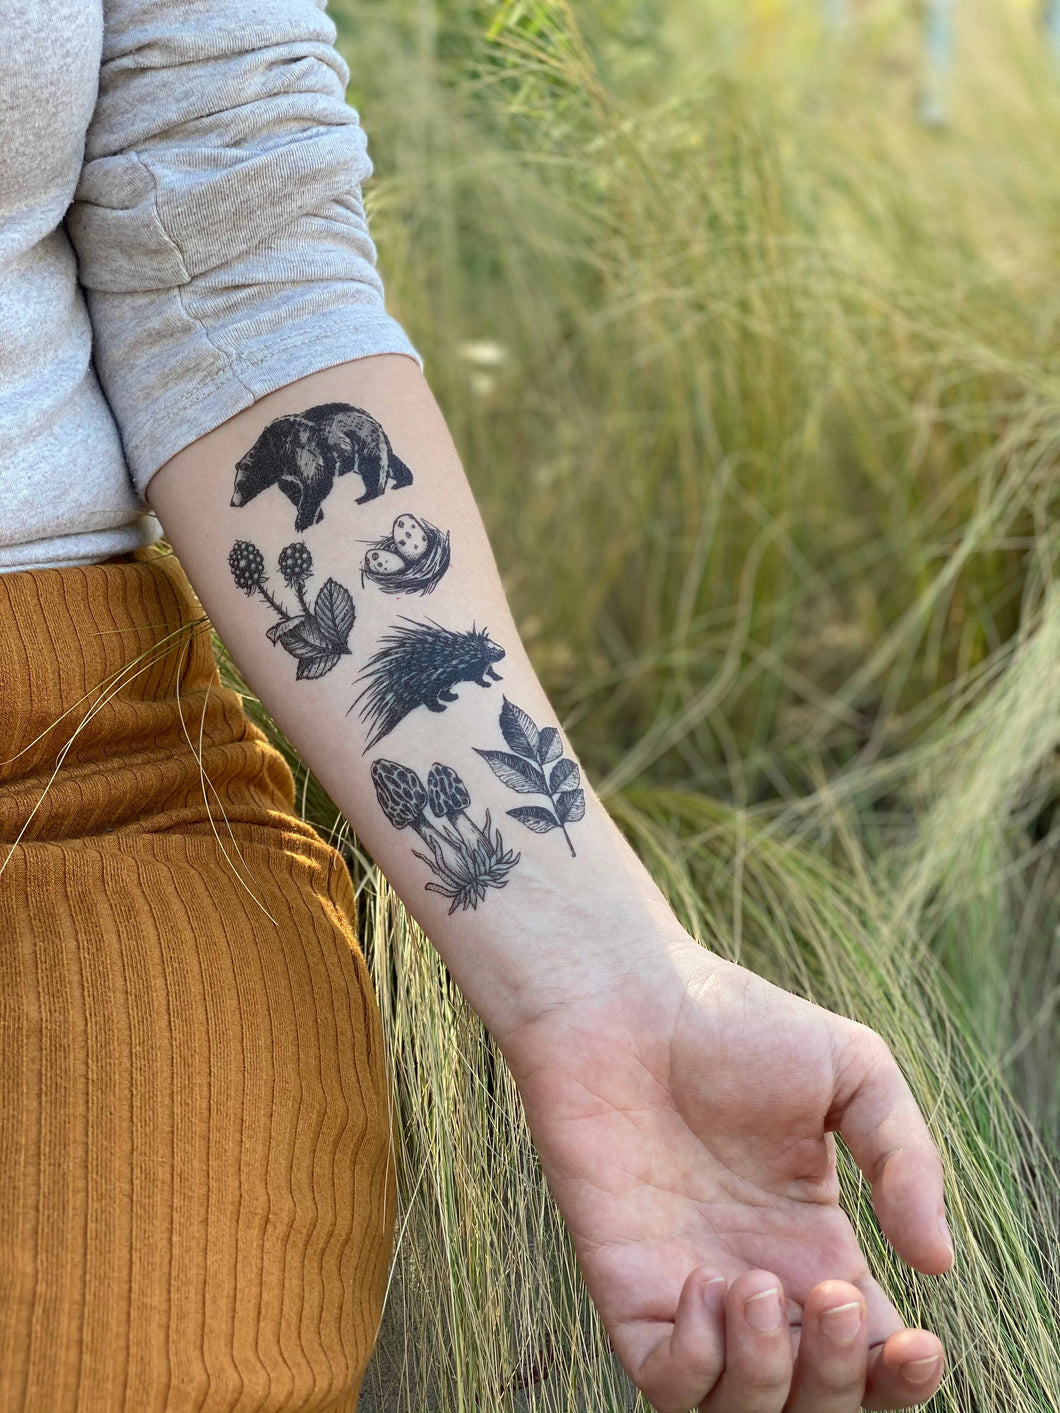 Express yourself with these fun nature-themed temporary tattoos.  Peacefully roaming and foraging, this bear and porcupine explore the forest for snacks while always ready and equipped to defend themselves. 